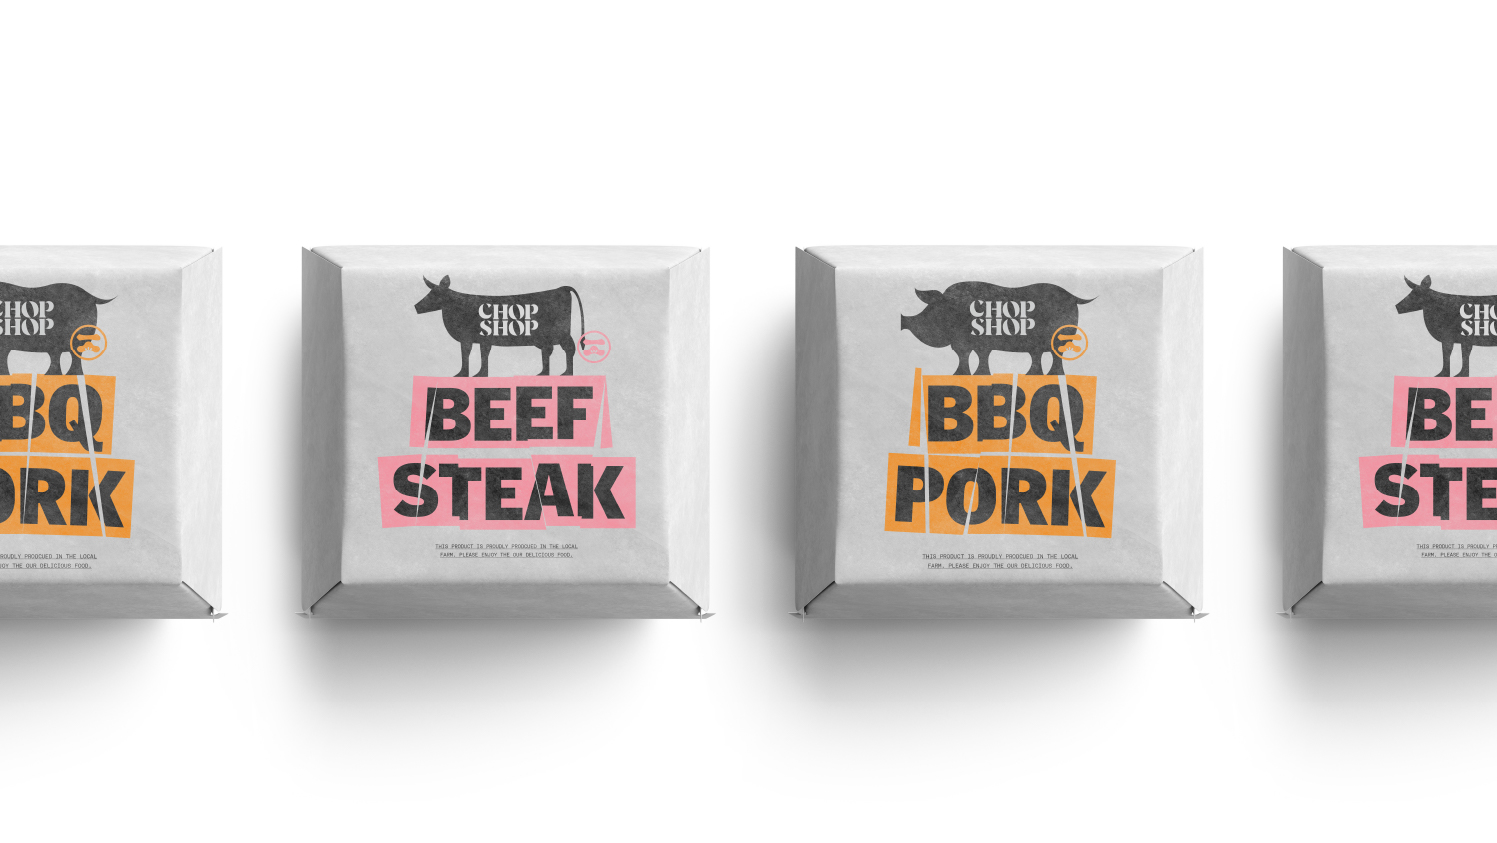 Stamp Works Agency Creates Branding for Chop Shop BBQ Food Truck in Japan